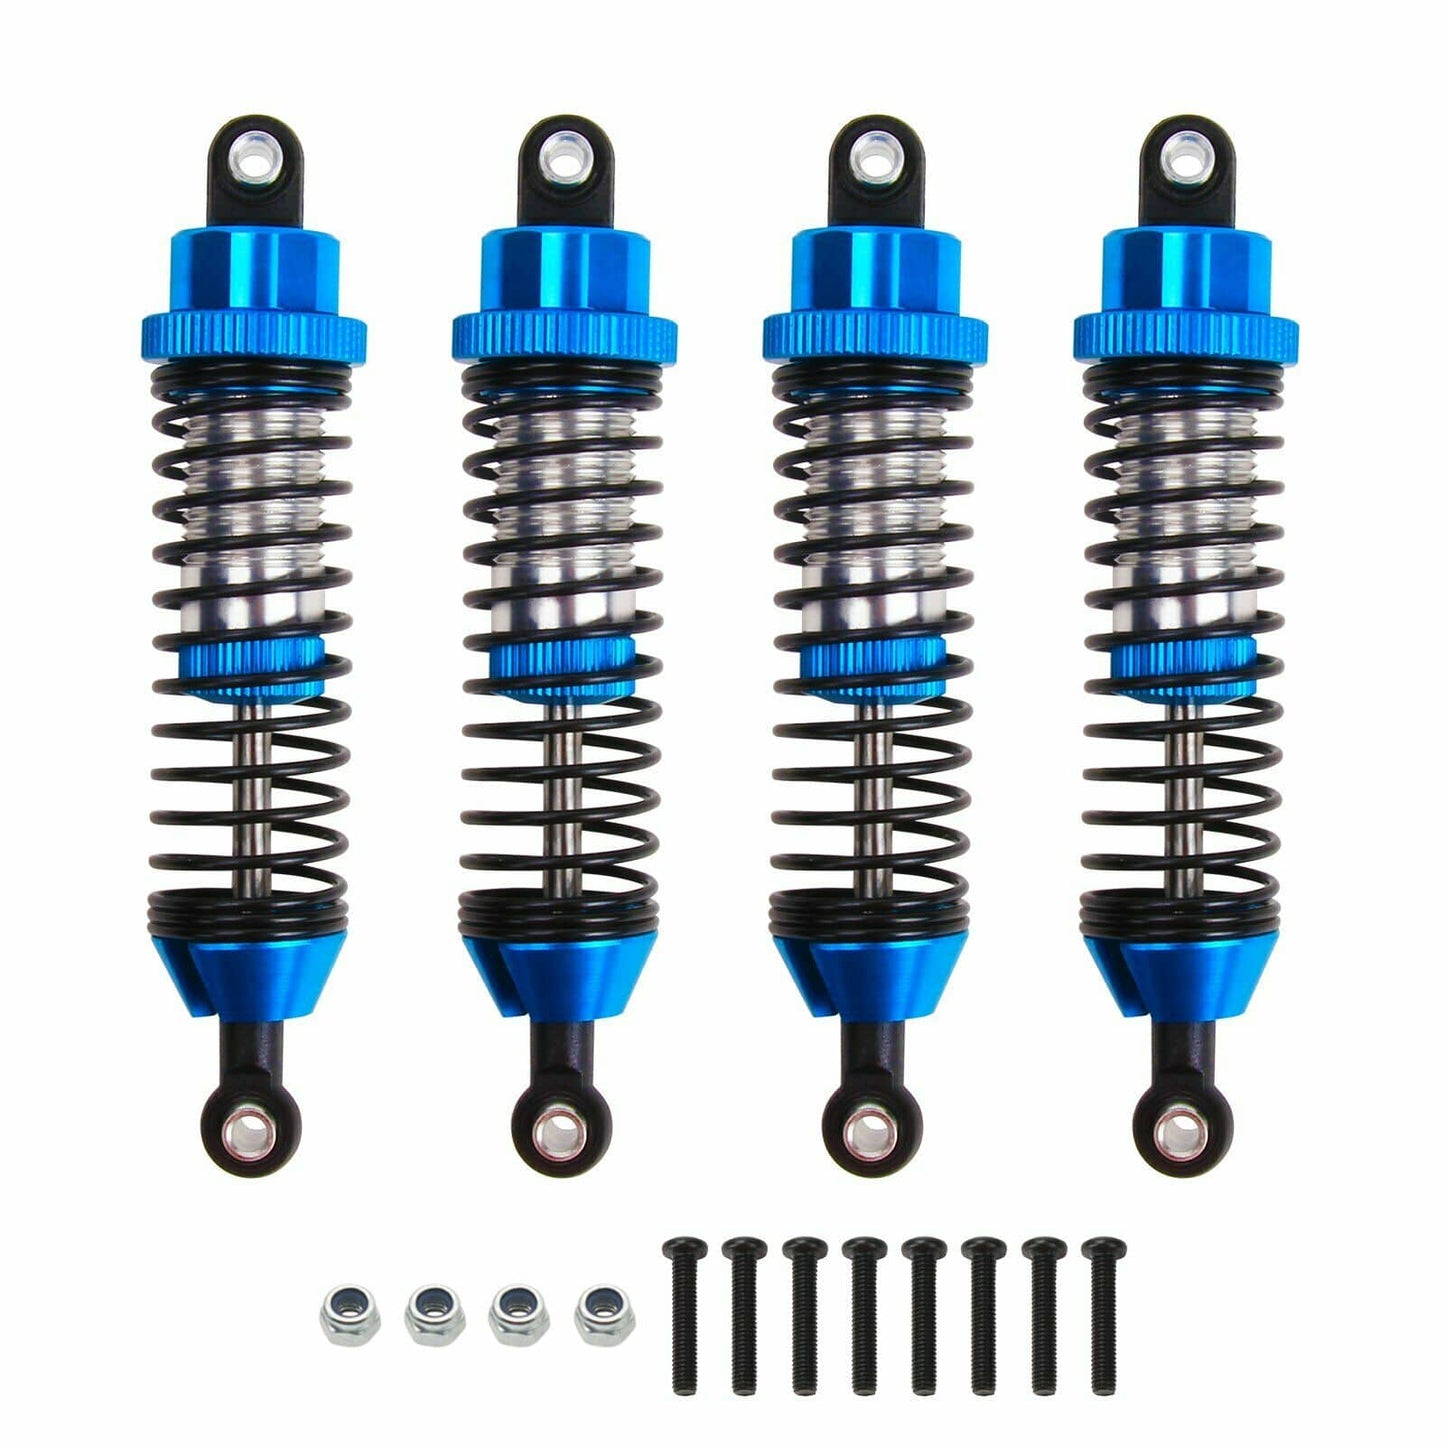 RCAWD REDCAT UPGRADE PARTS Blue RCAWD RCFront Rear Shock BS214-011 for 1/10 Redcat Racing Blackout SC XTE XBE PRO